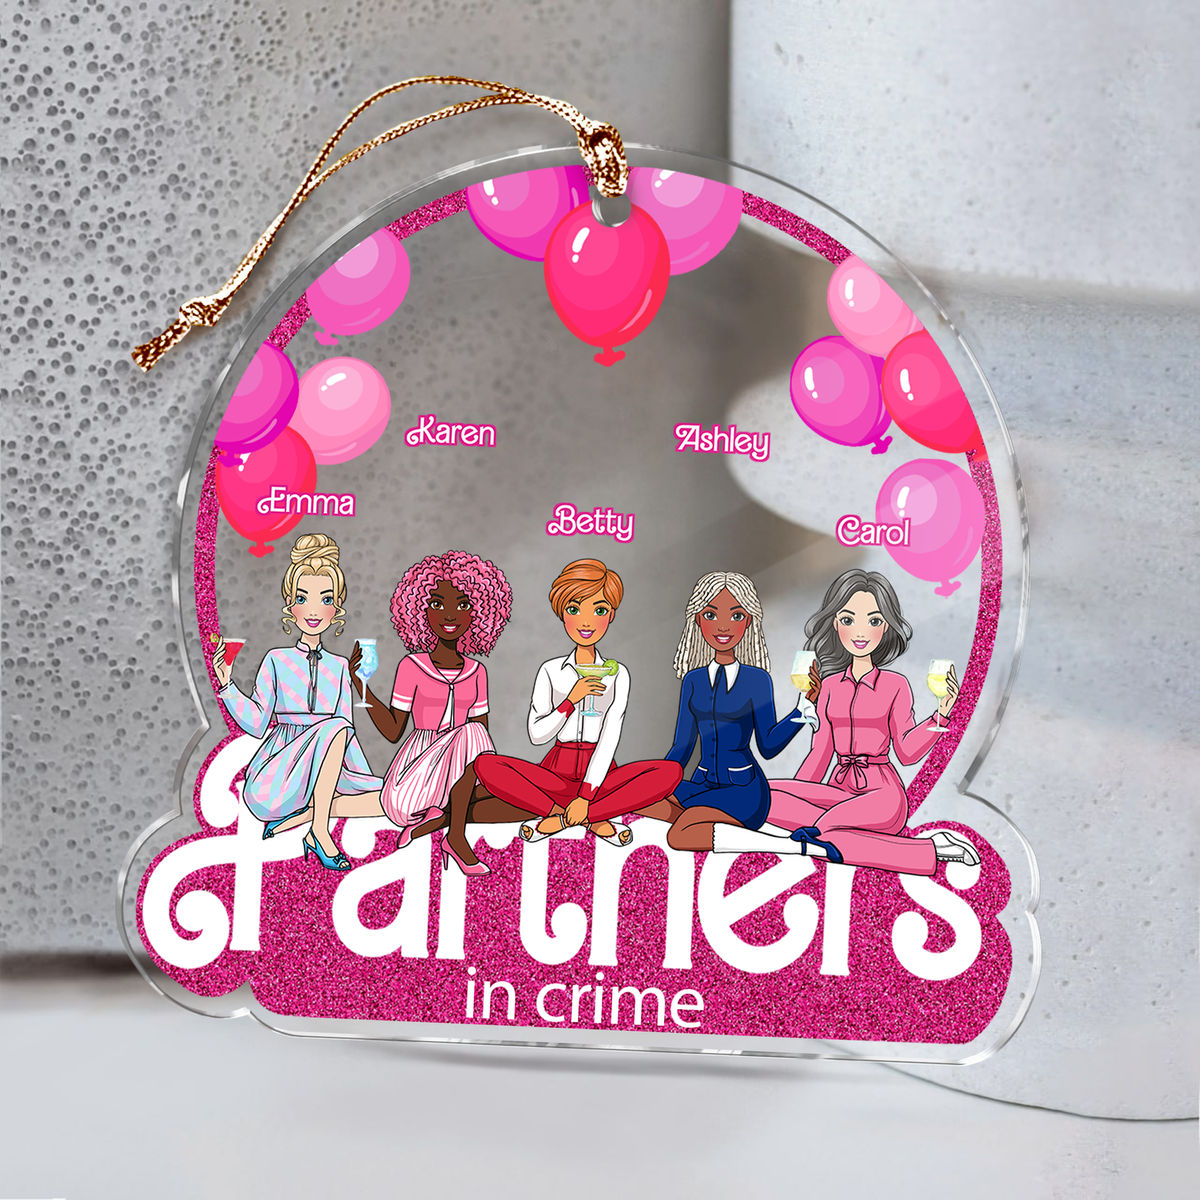 Unique Personalized Gift - Custom Acrylic Ornament - Best Gifts For Partners in Crime (b1)_1